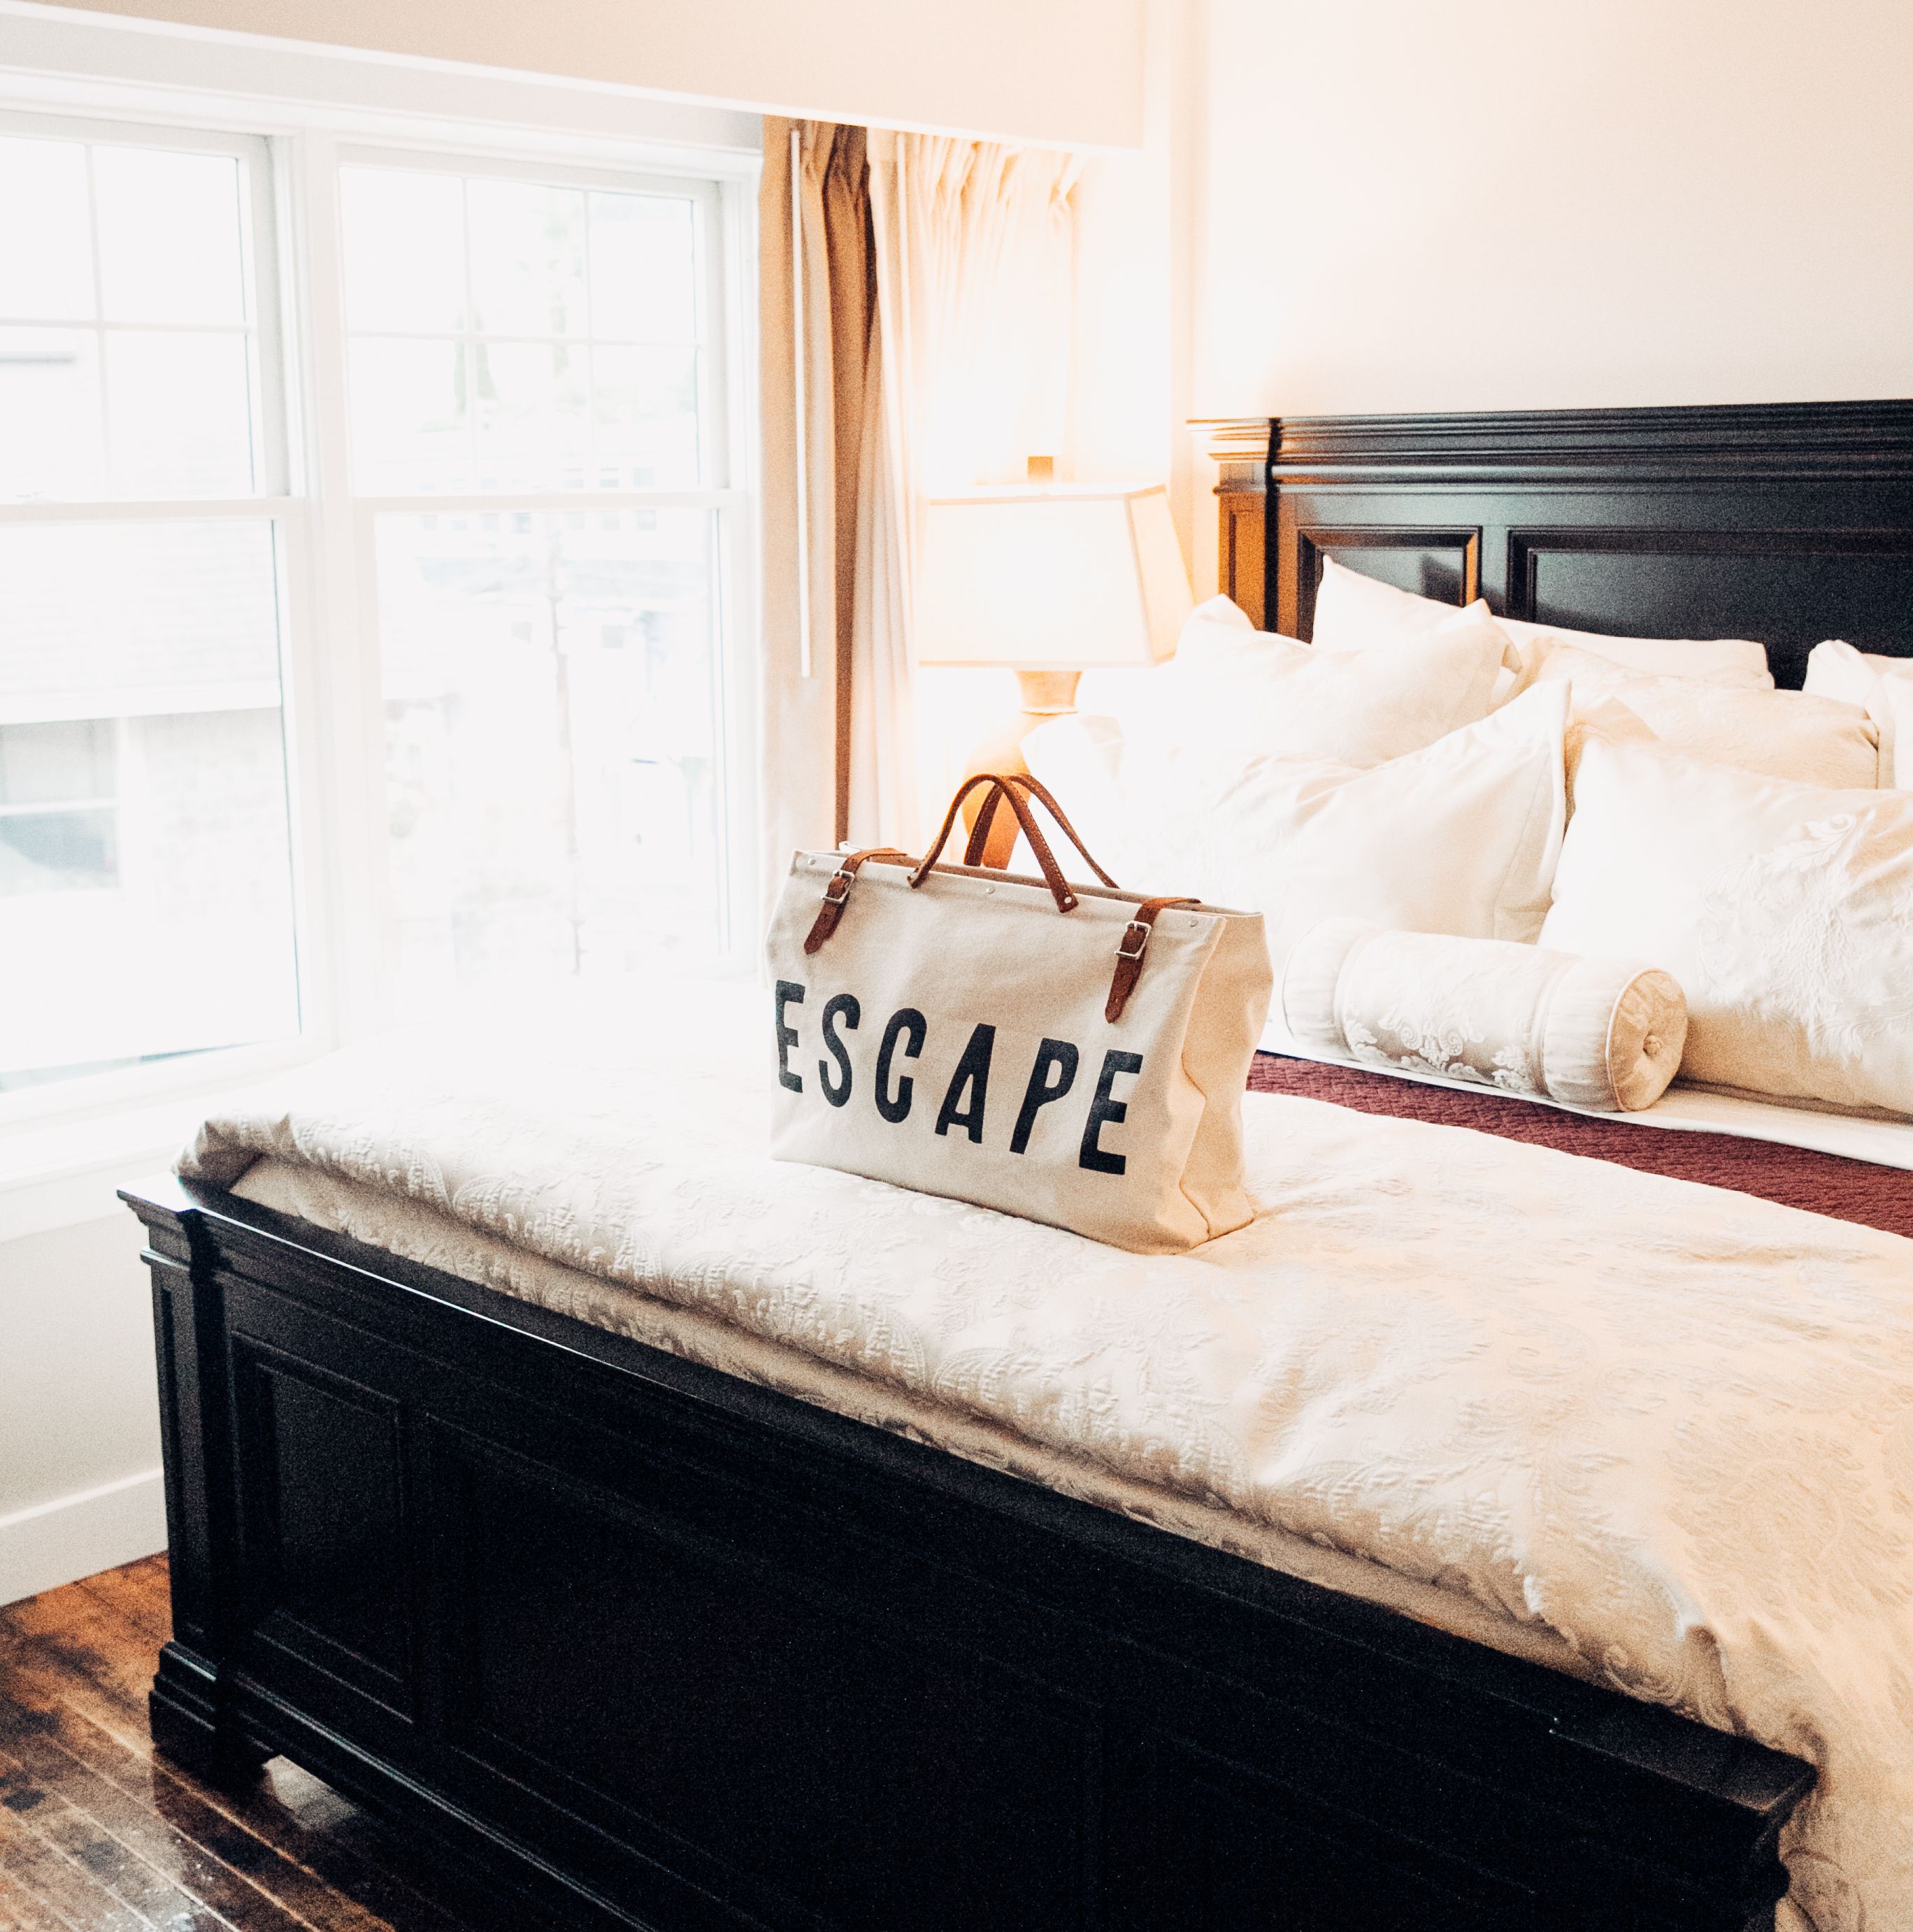 Historic Boutique Hotel in Maine | 16 Bay View Hotel | Best Places to Stay in Maine | Best Hotels on the Coast of Maine | Where to stay in the coastal towns of Maine | Travel Guide to the coast of Maine | How to Experience Maine | Camden, Maine | Best of Maine via Travel Blogger @elanaloo + elanaloo.com